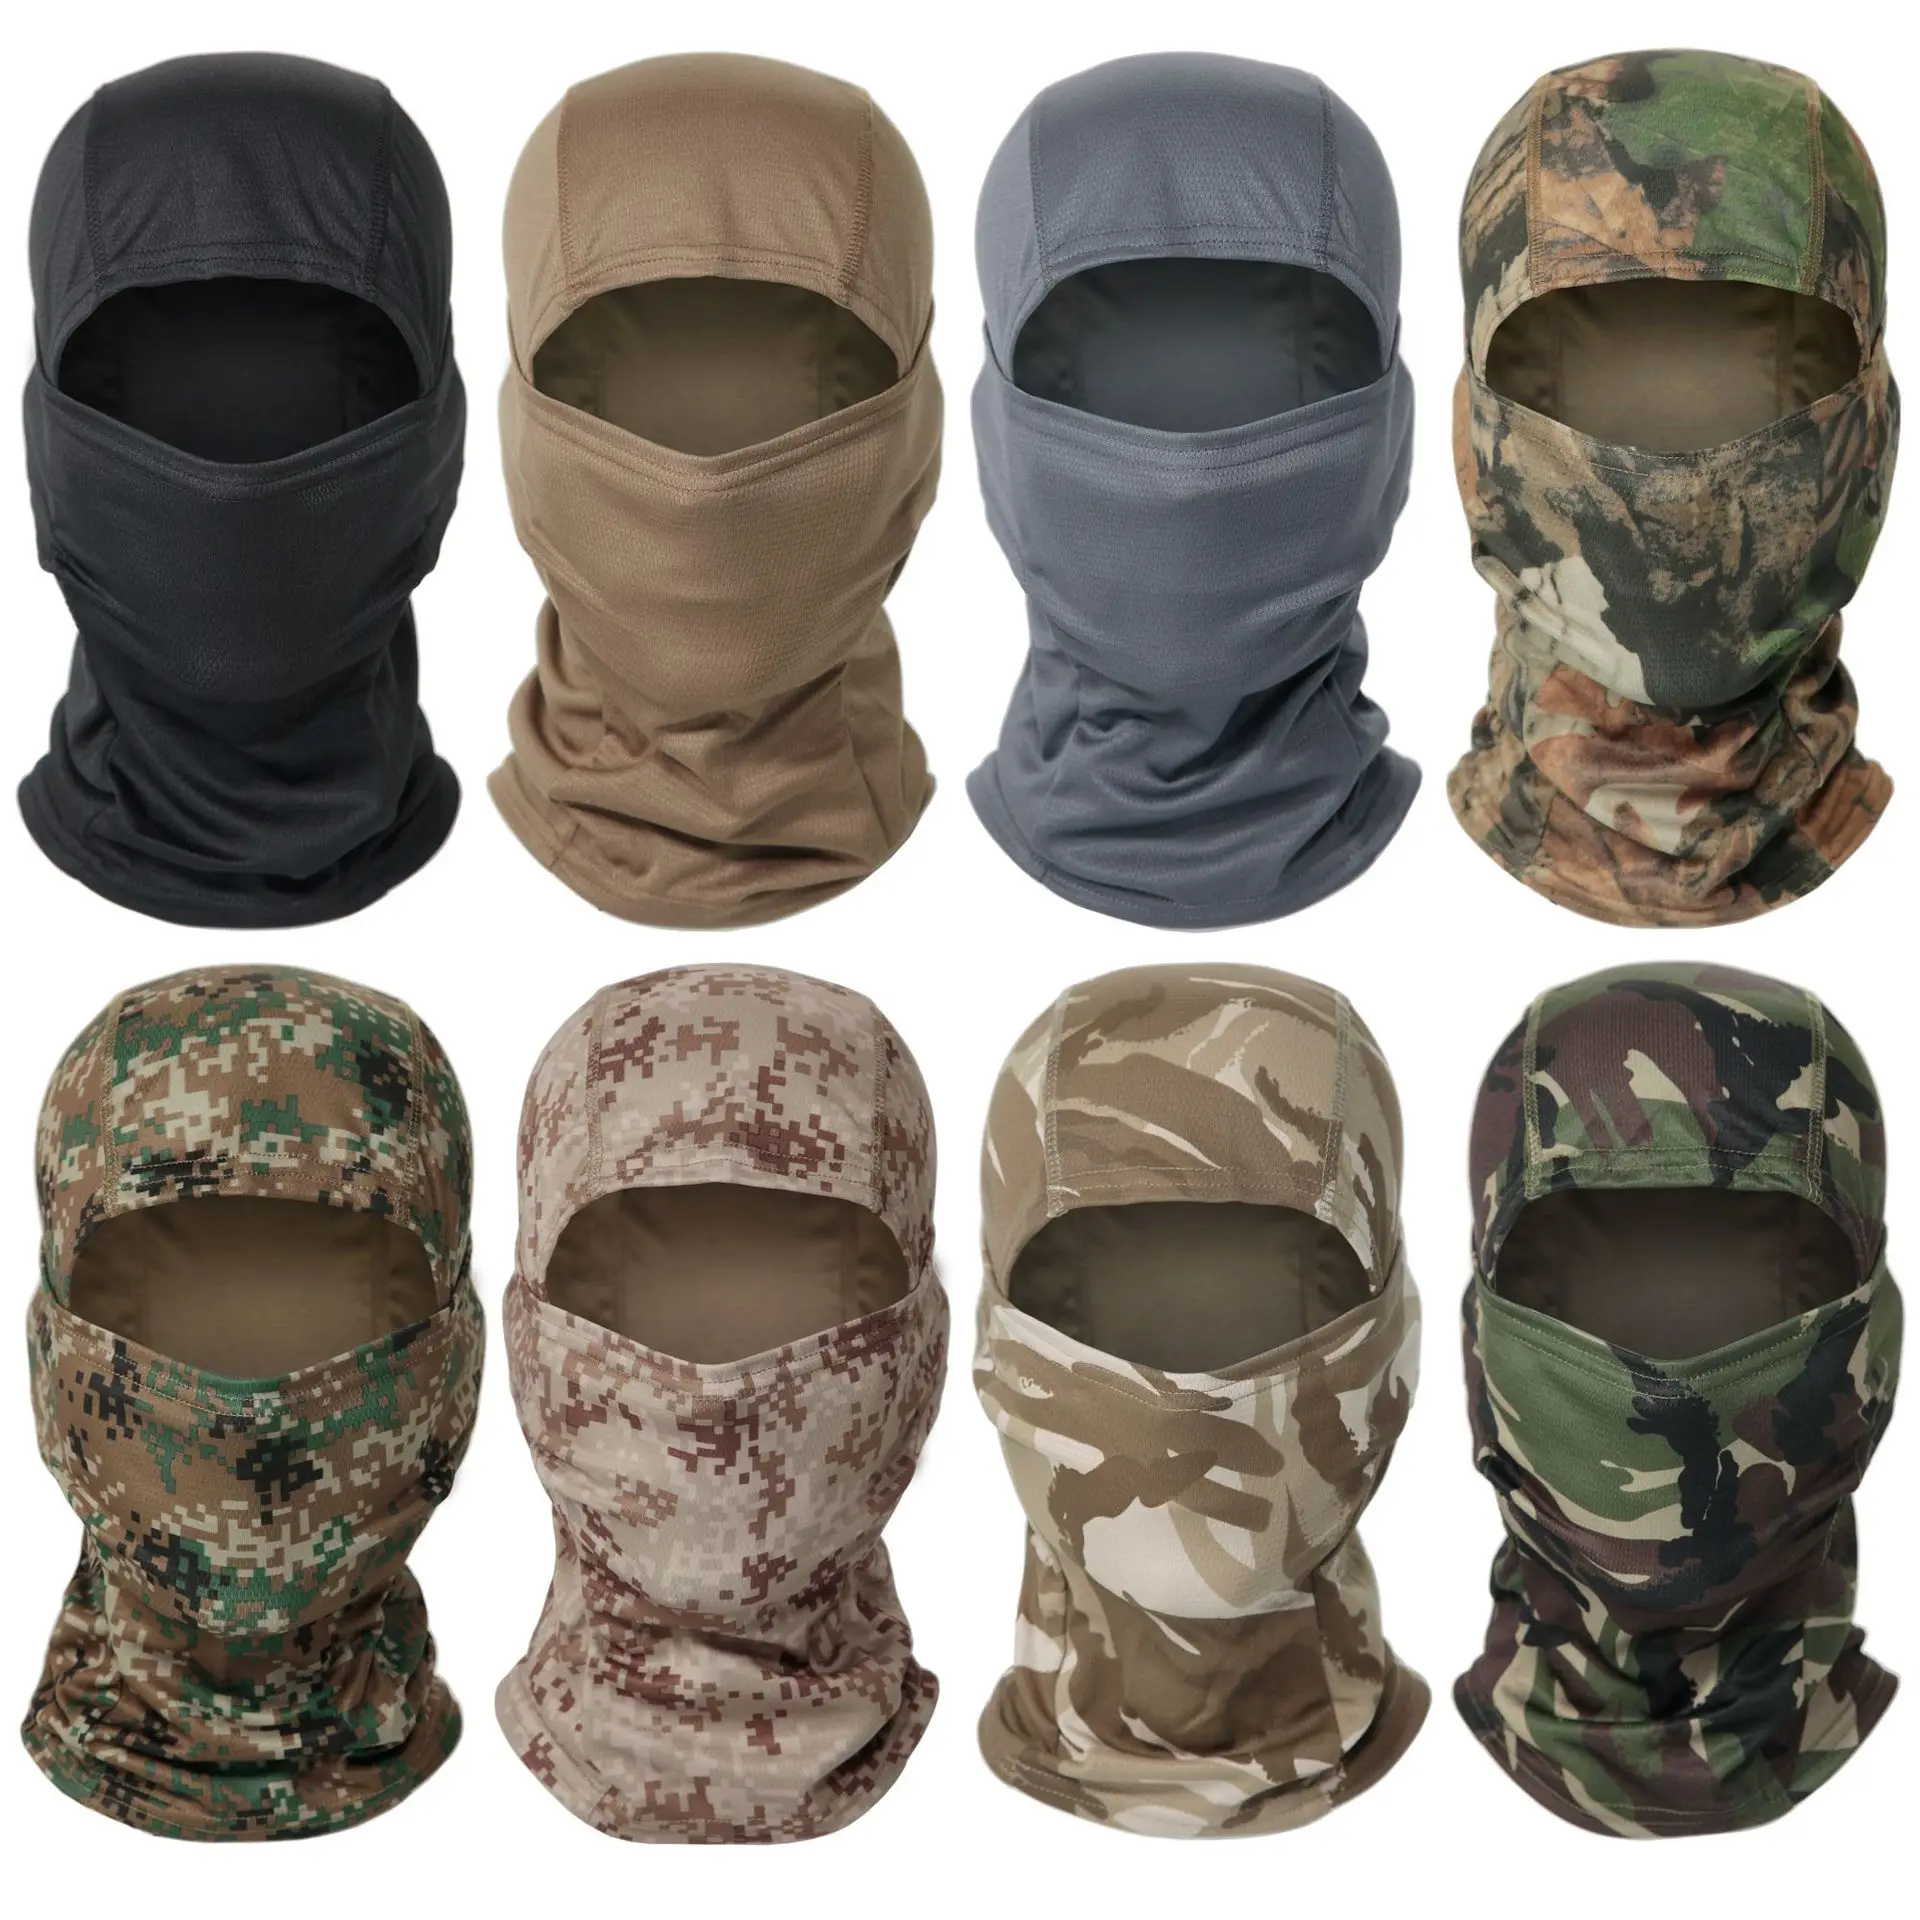 Windproof Balaclava Hat Ski Winter Outdoor Camo Tactical Full Face Mask Cover 